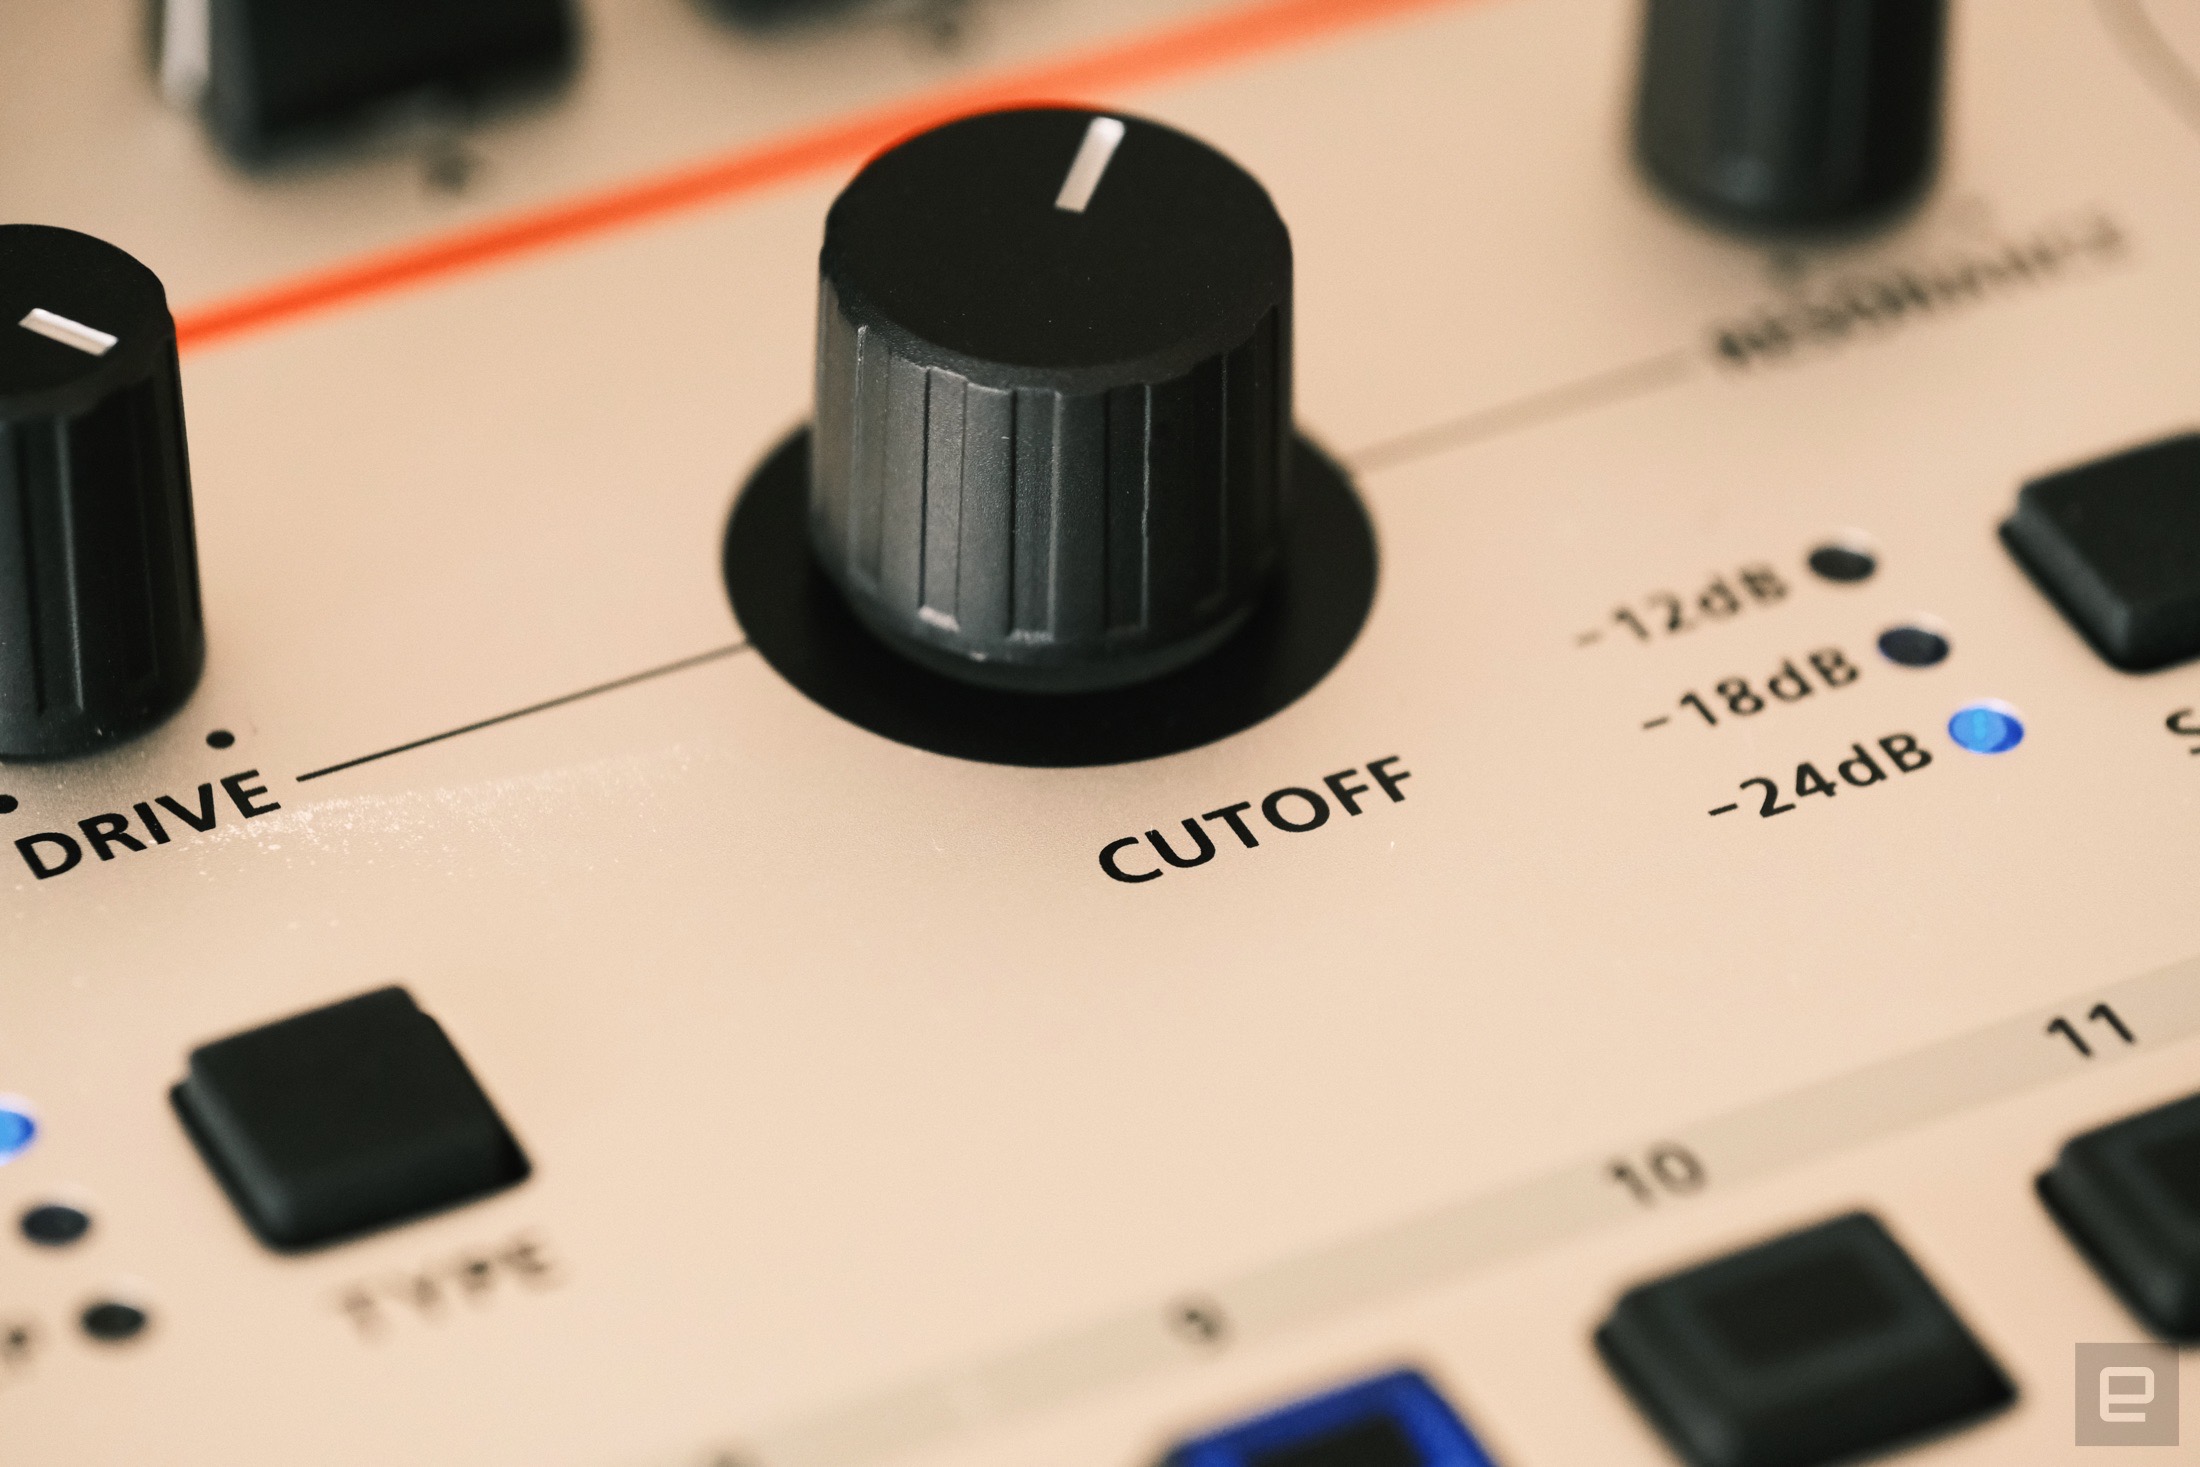 The Roland Gaia 2 Filter Cutoff Knob and Slope LEDs